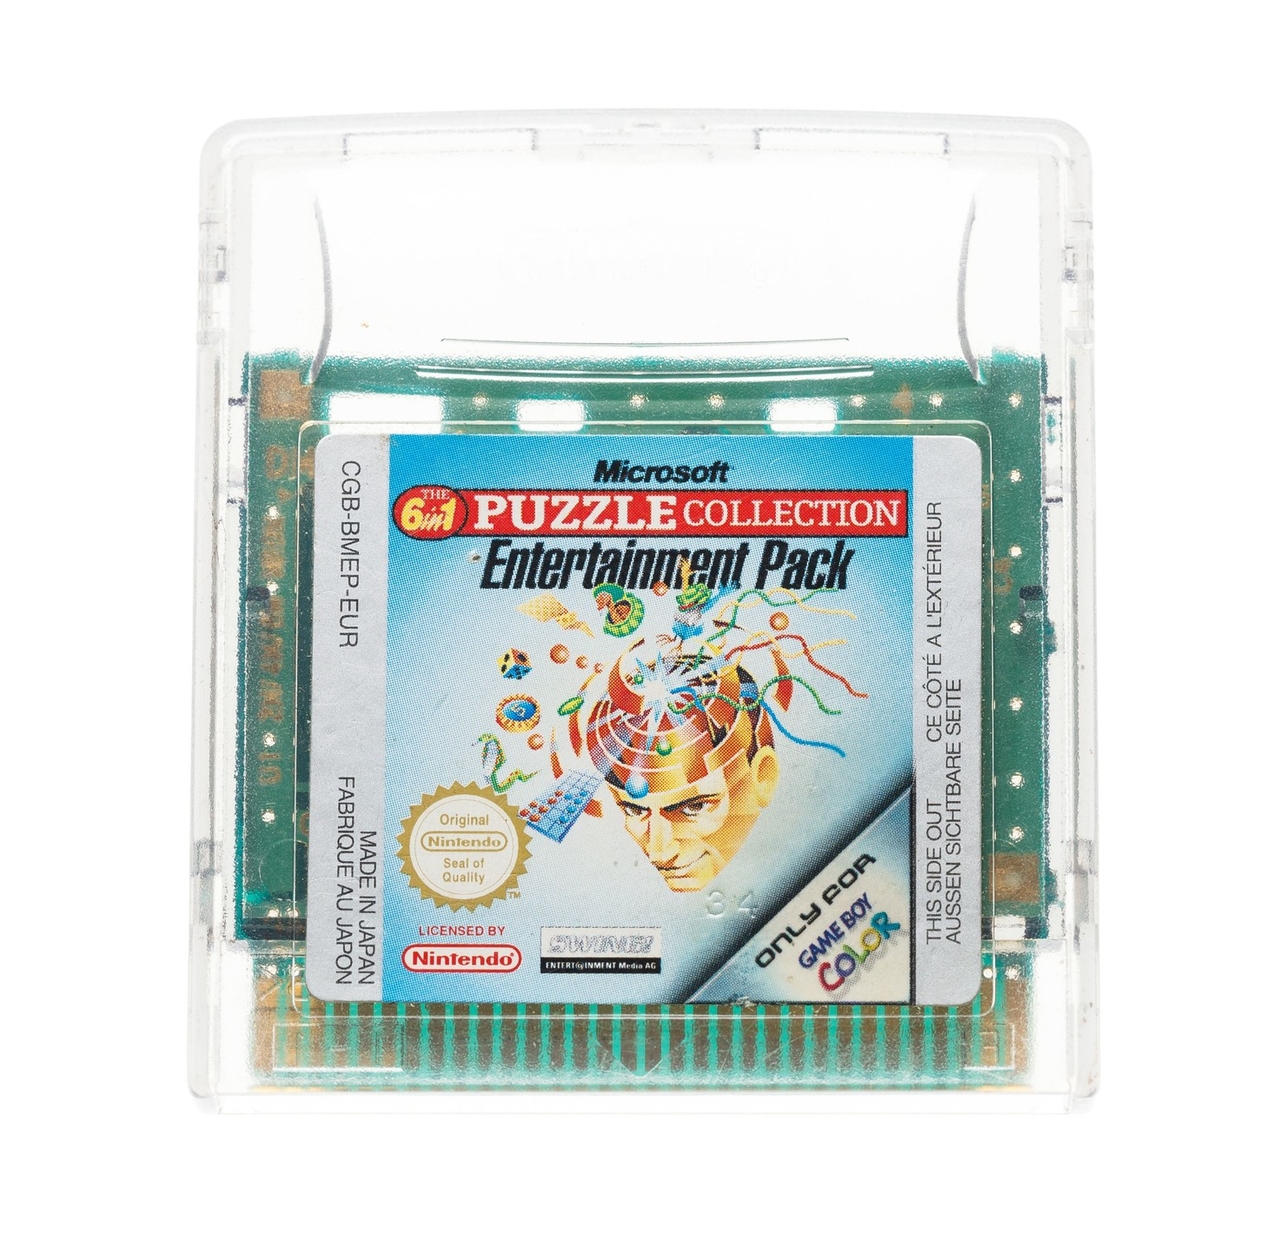 Microsoft Puzzle Collection Entertainment Pack - Gameboy Color Games